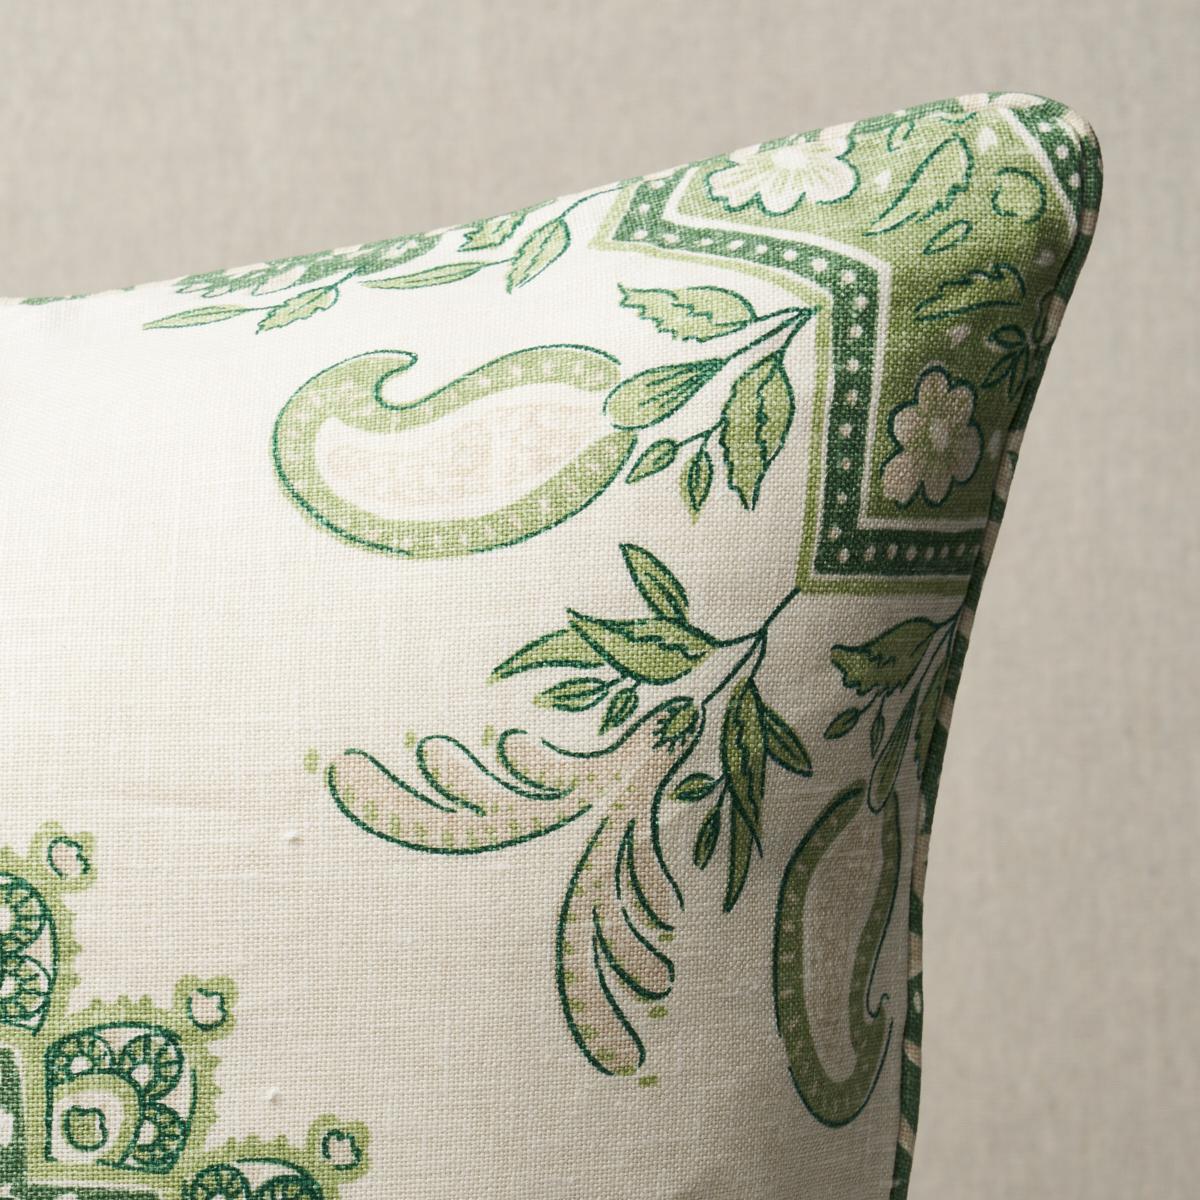 This pillow features Montecito Medallion by Mark D. Sikes for Schumacher with a self welt finish. This stunning large-scale medallion in leaf green evokes timeless motifs from India and Turkey for a chic, global vibe. Pillow includes a feather/down